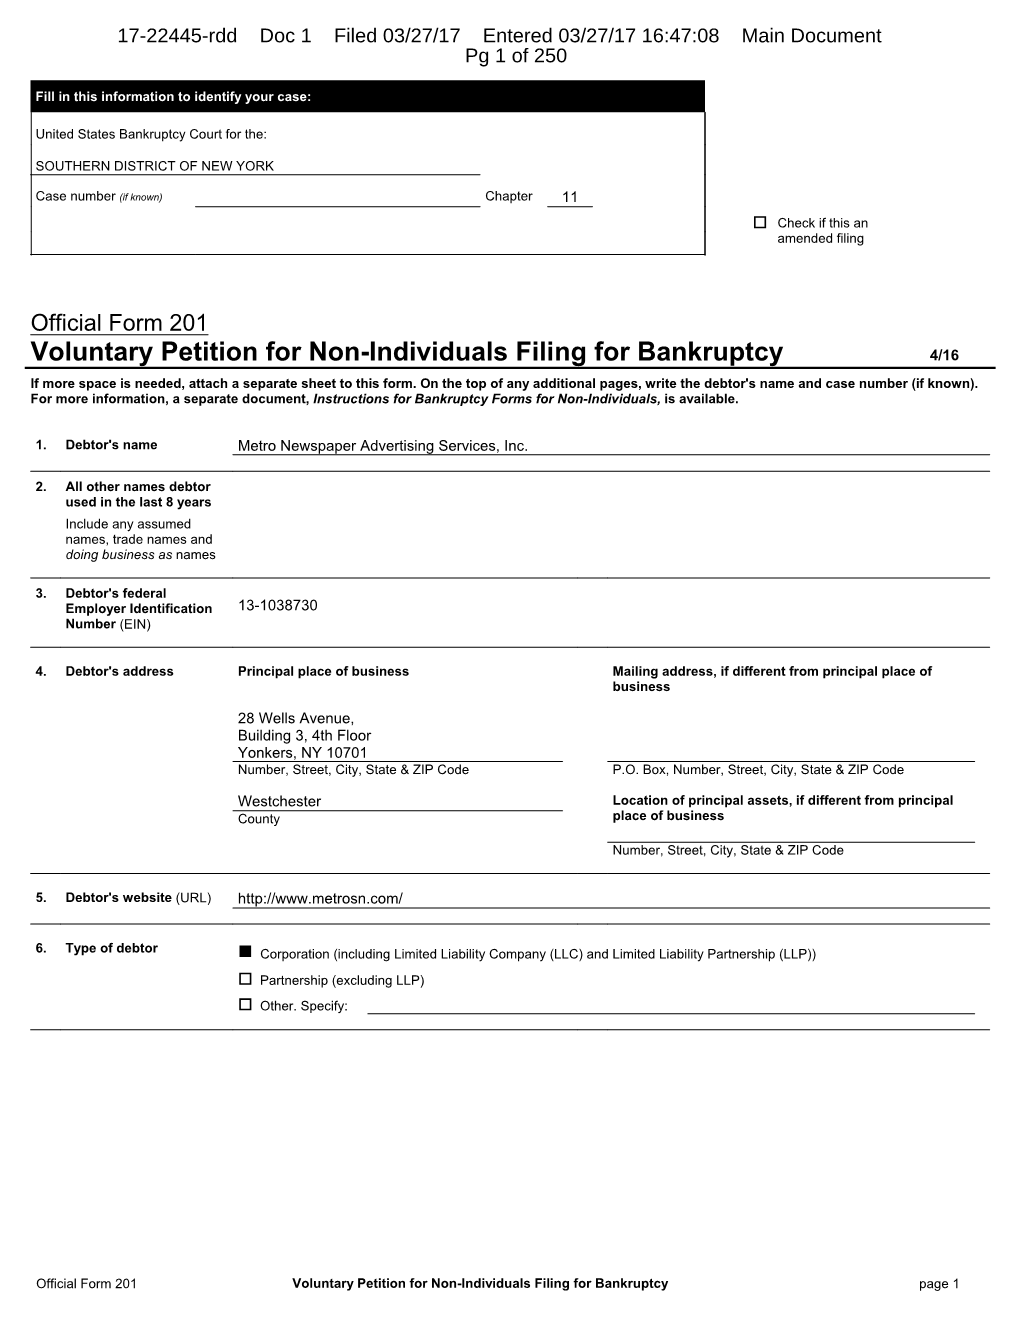 Voluntary Petition for Non-Individuals Filing for Bankruptcy 4/16 If More Space Is Needed, Attach a Separate Sheet to This Form